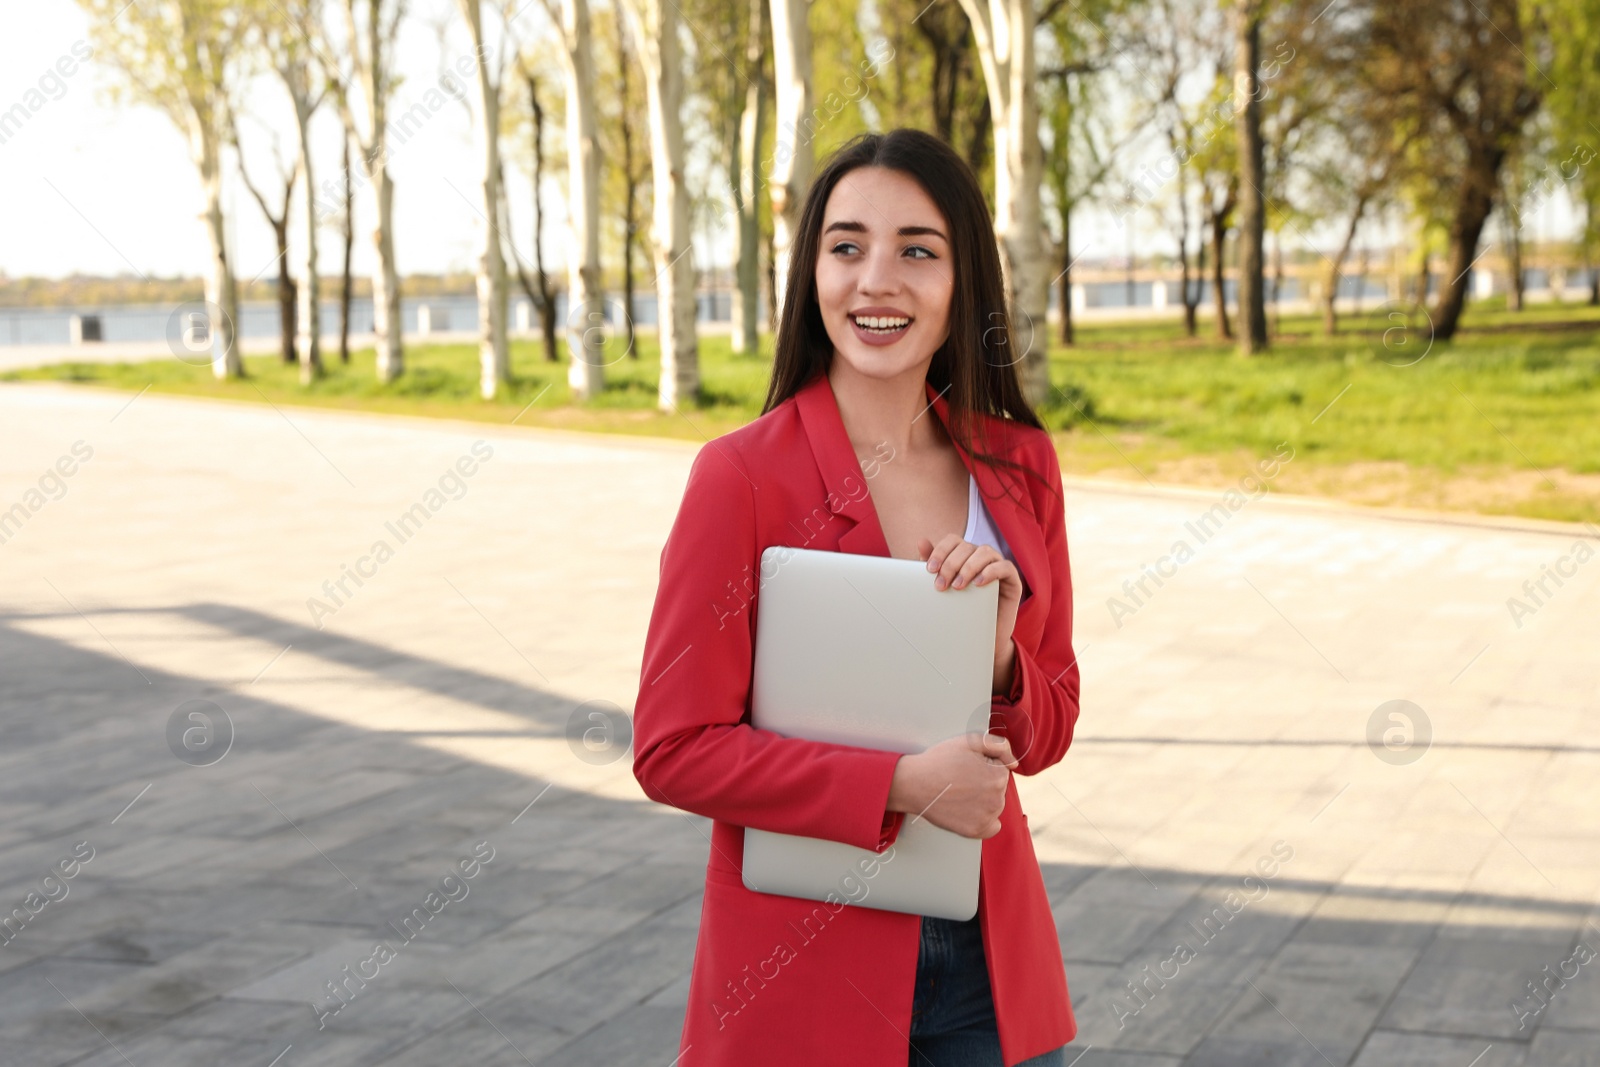 Image of Happy young woman with laptop walking outdoors